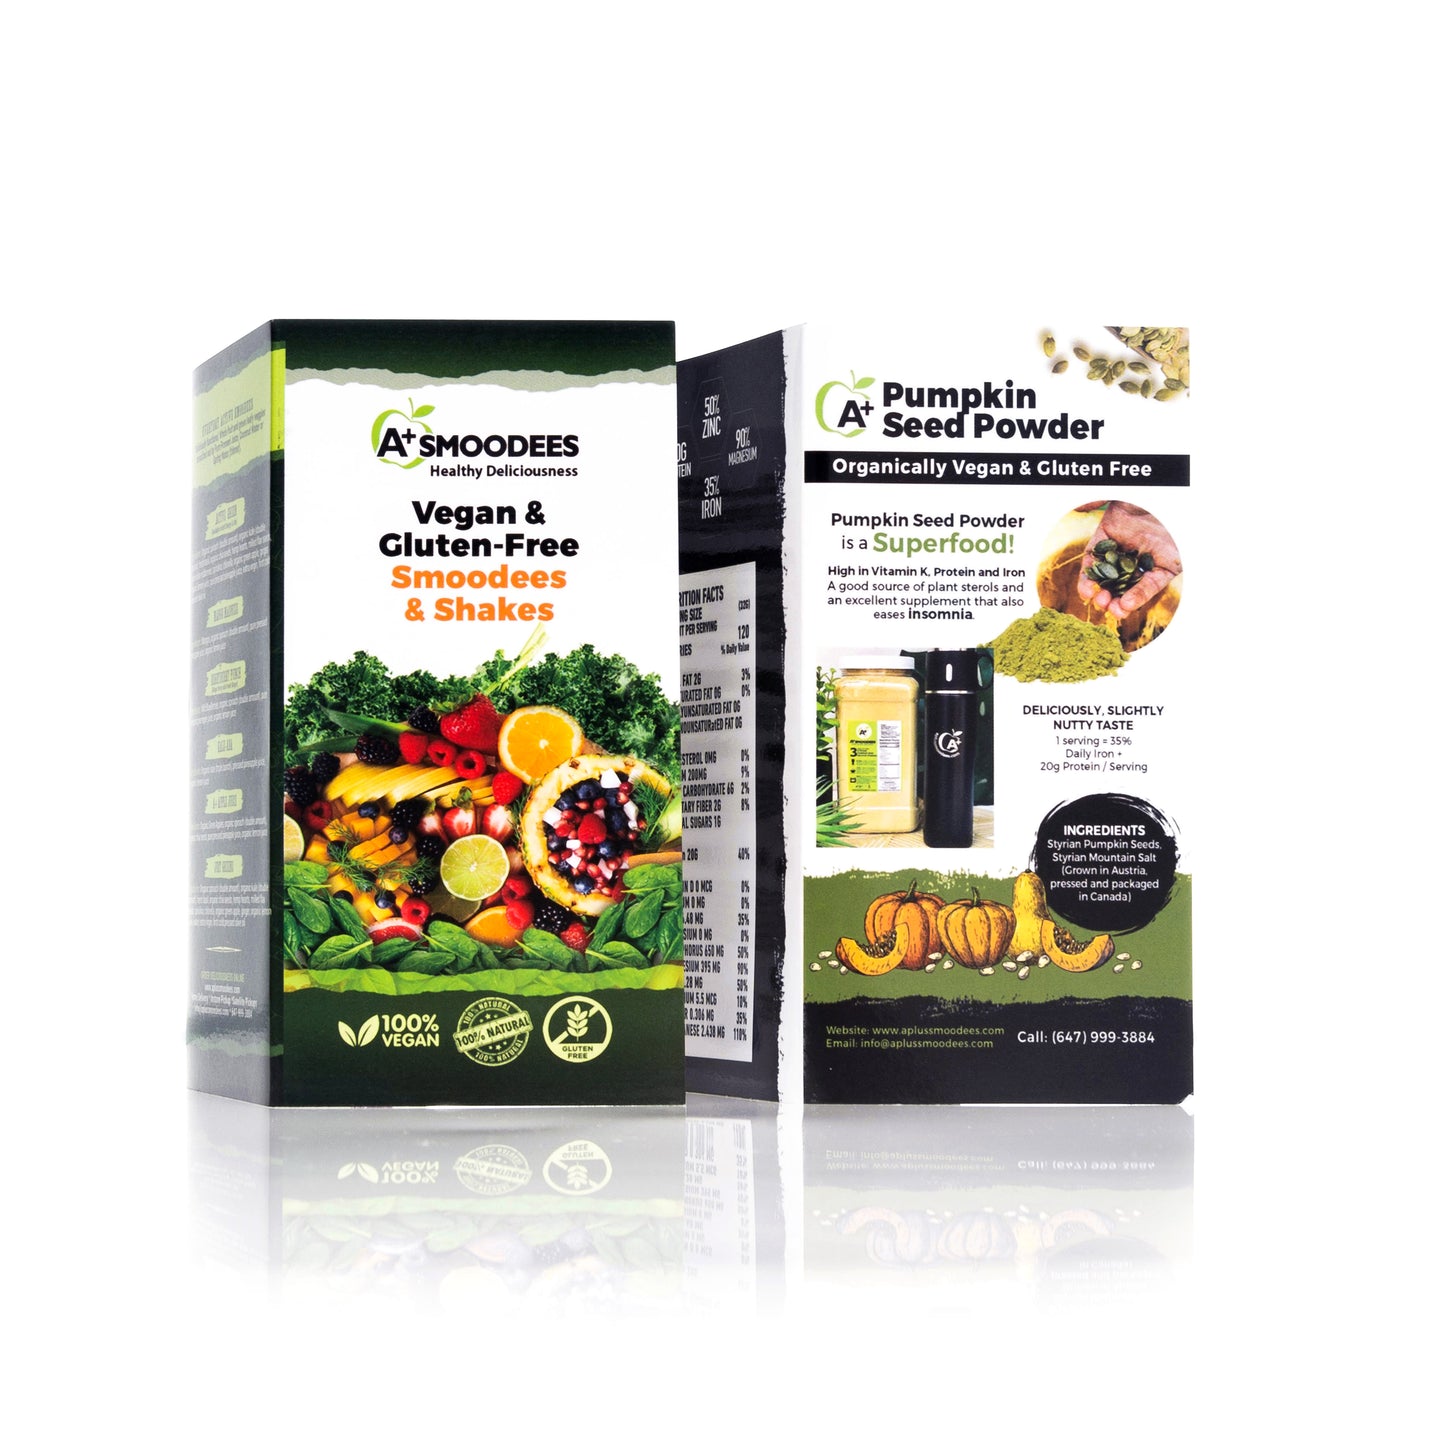 STAMINA Energy Pack (7 Days) - A+ Smoodees